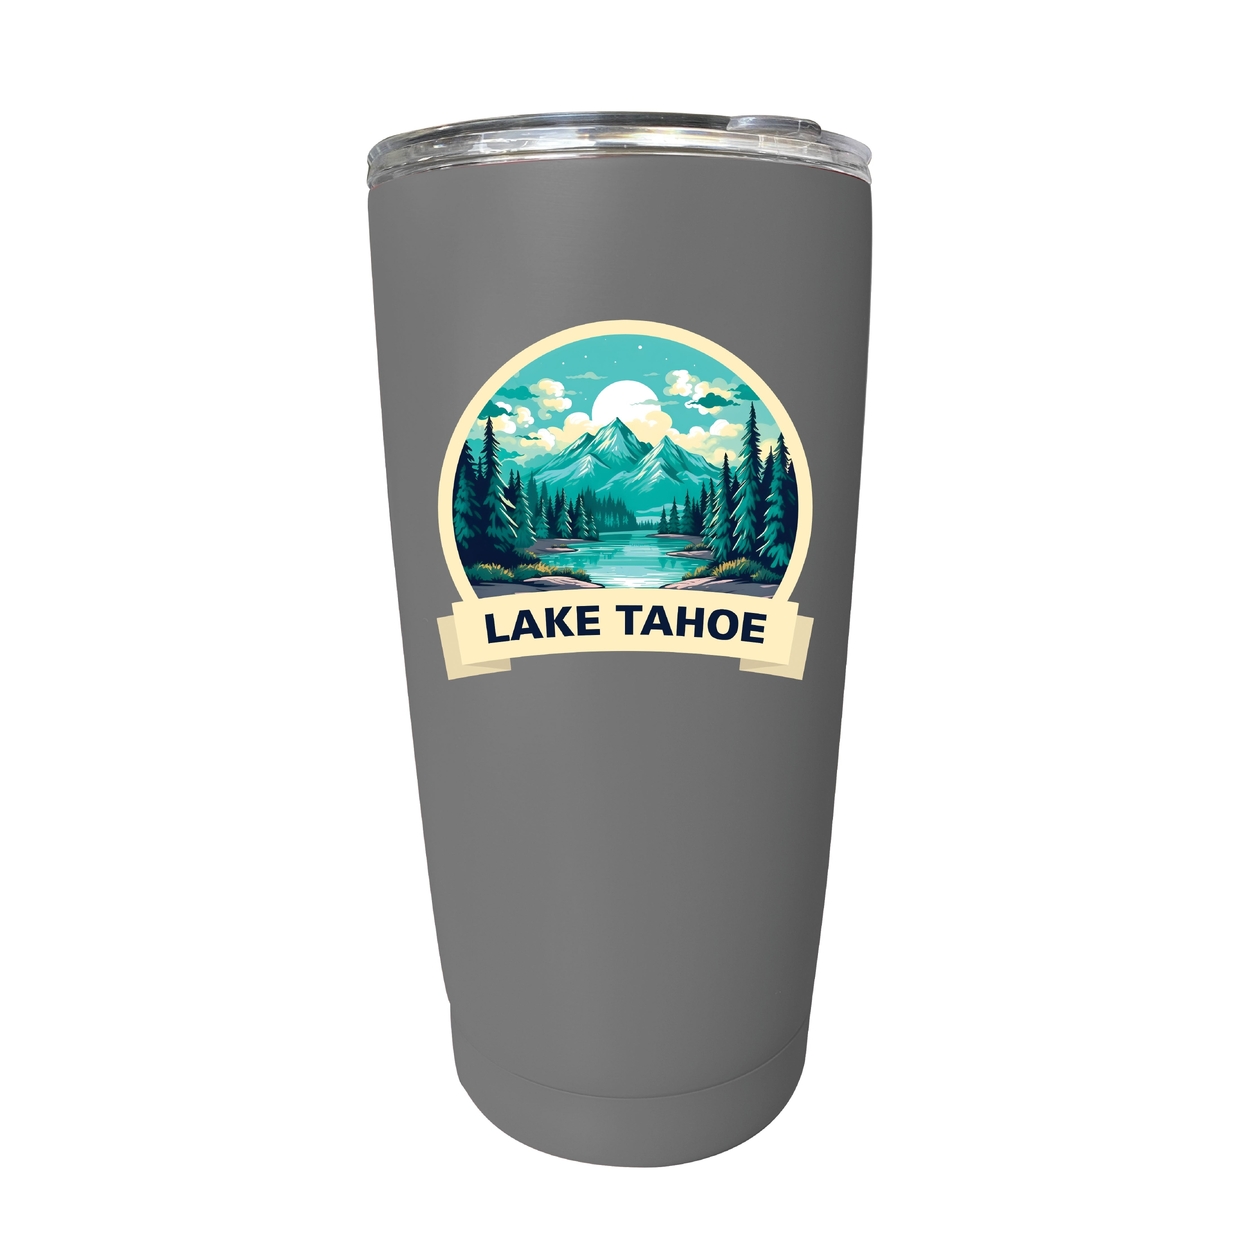 Lake Tahoe California Souvenir 16 Oz Stainless Steel Insulated Tumbler - Gray,,4-Pack